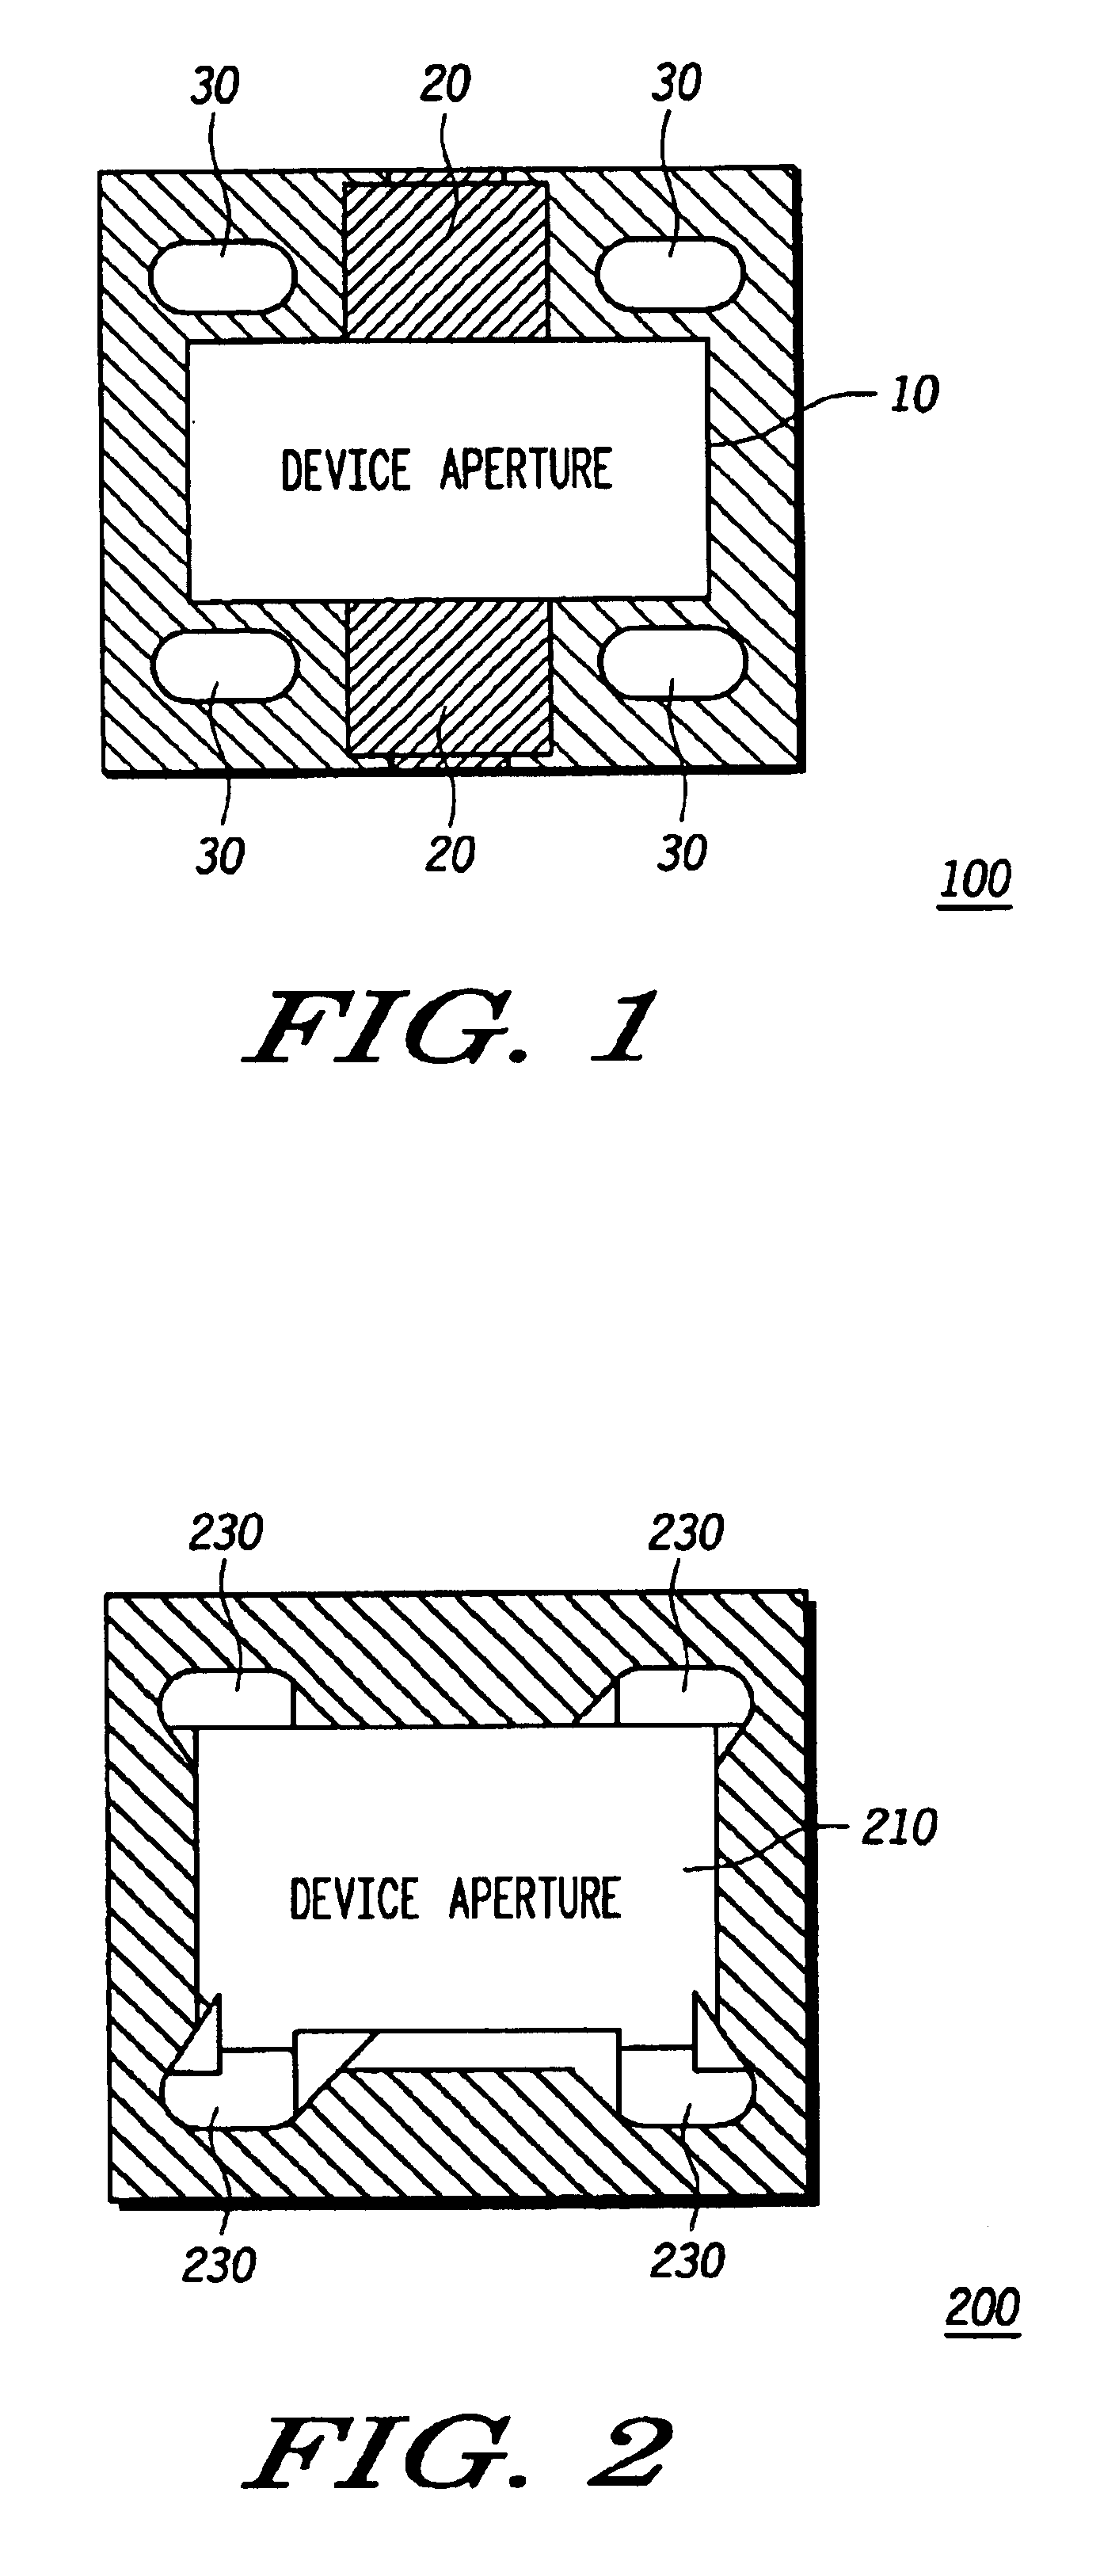 Electrical circuit apparatus and method for assembling same